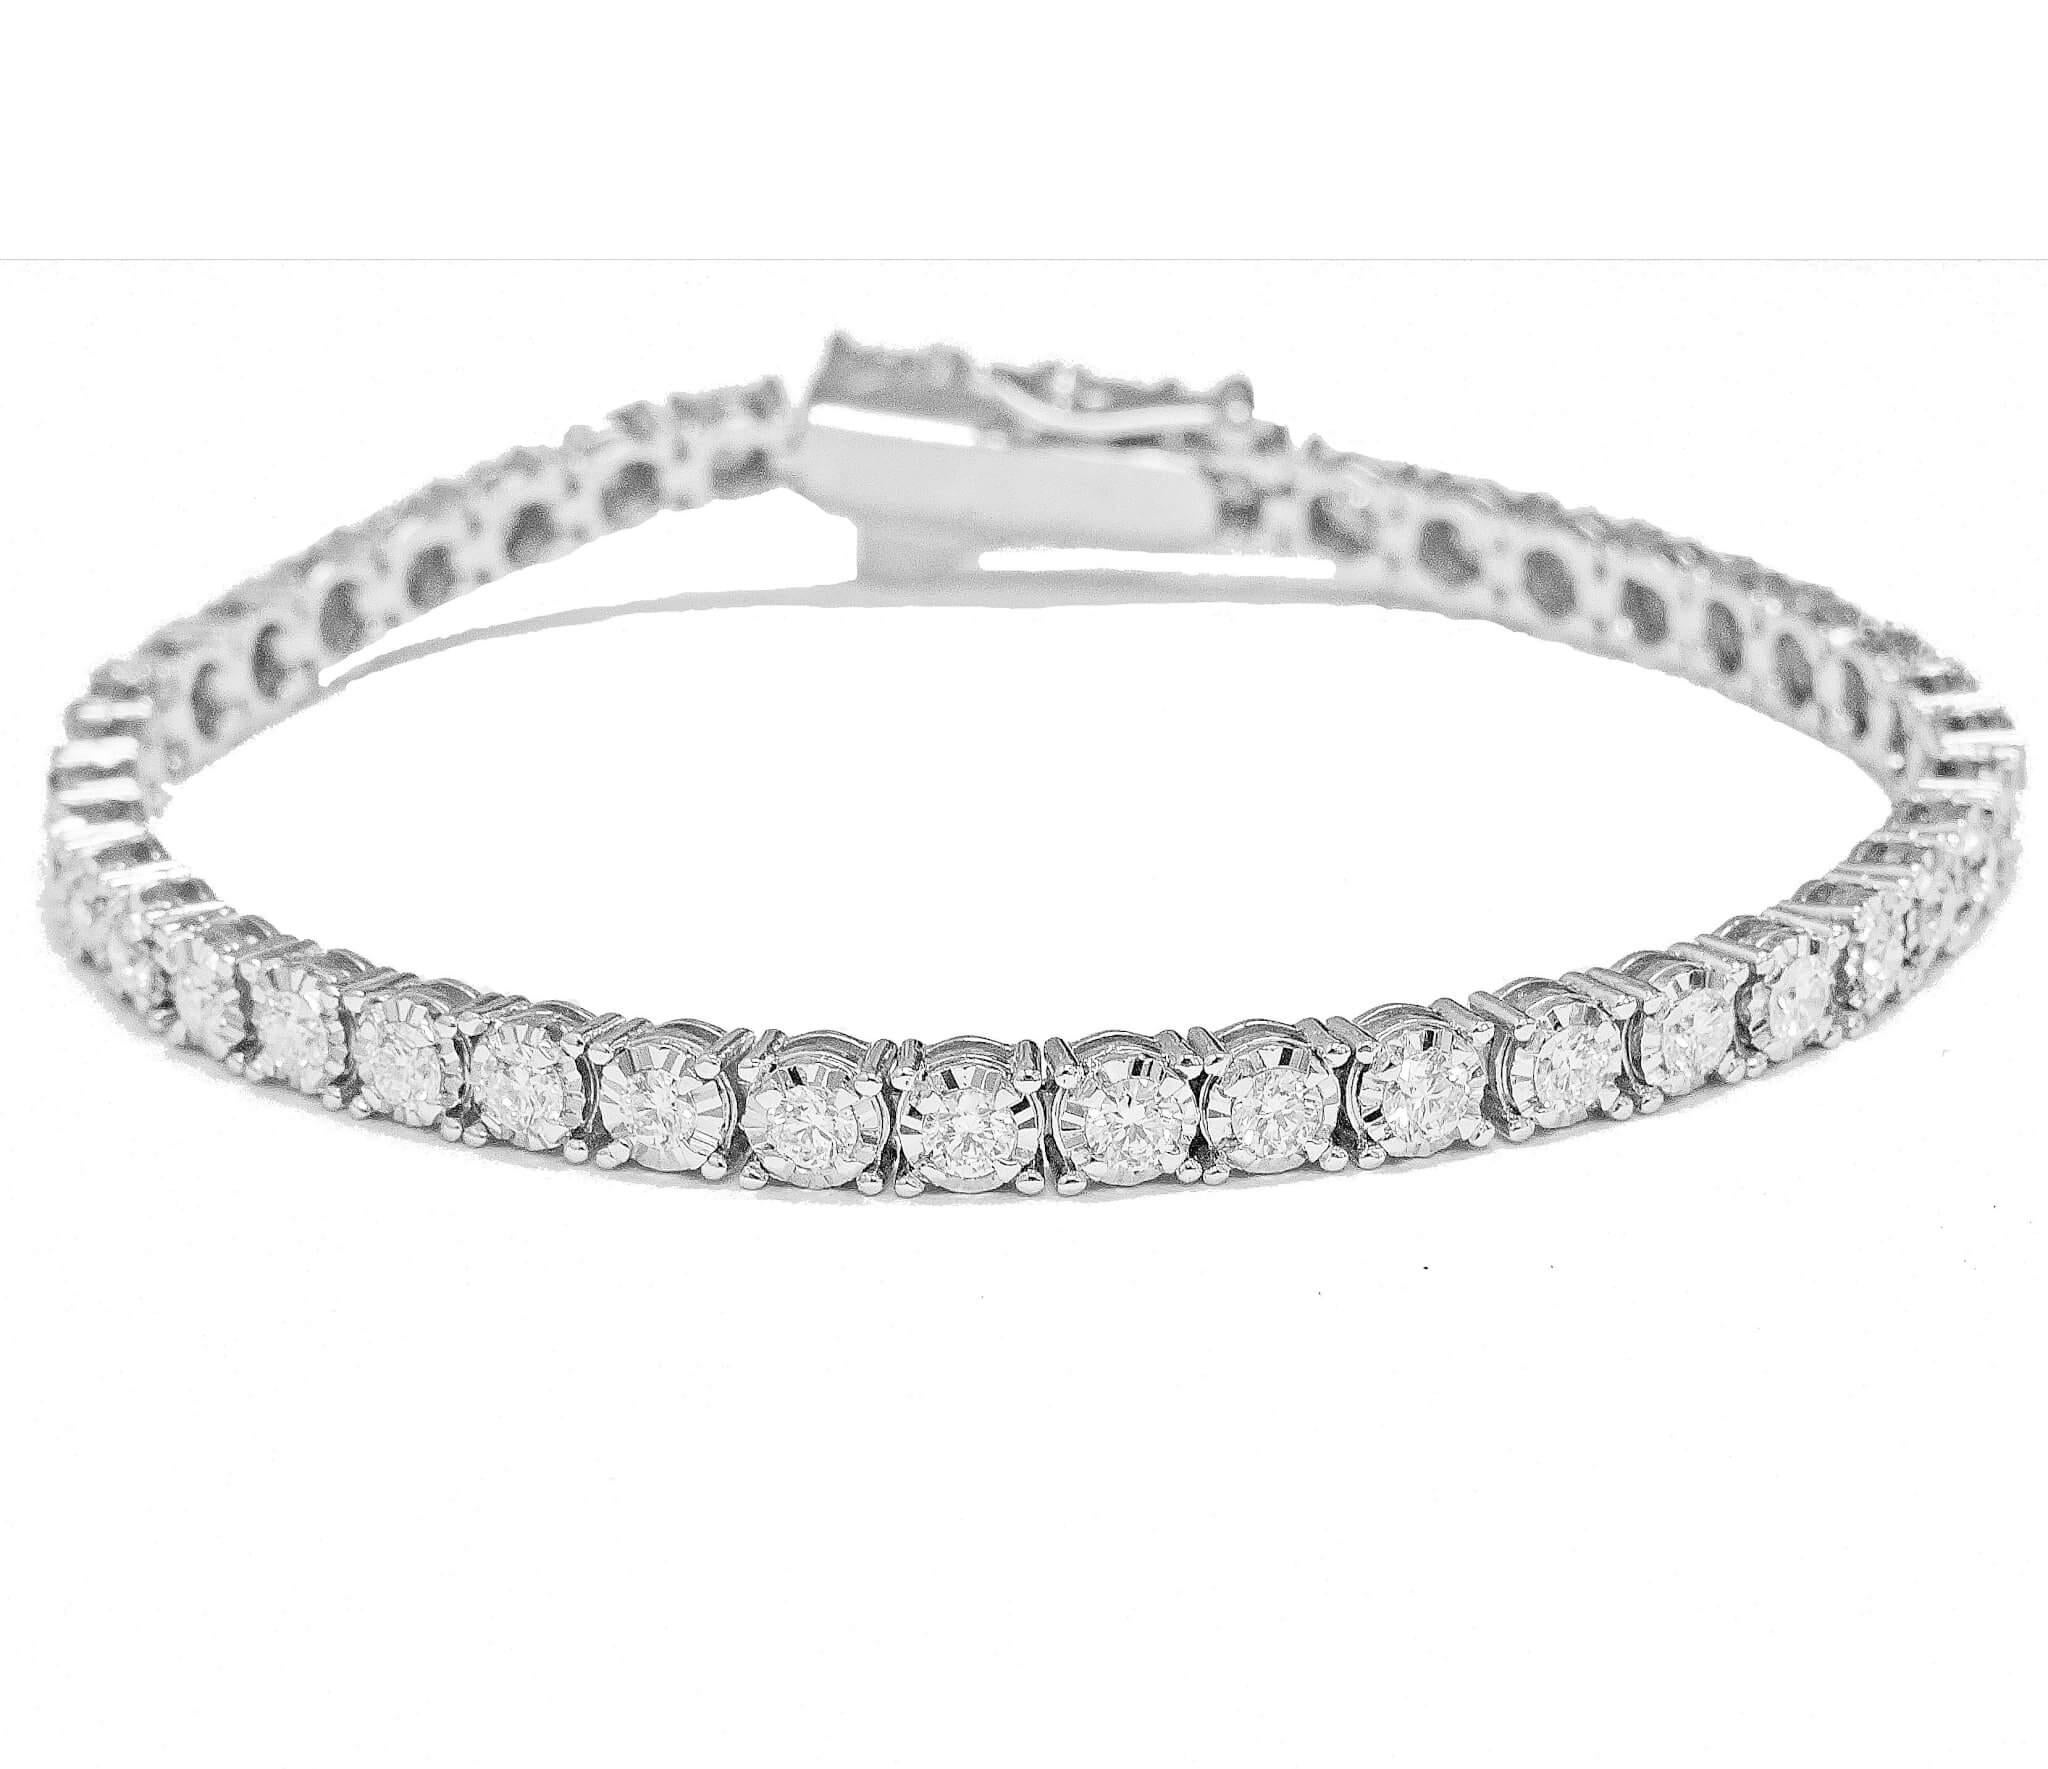 18ct white gold classic tennis bracelet

Can be ordered in 18ct yellow / 18ct white or rose gold

illusion set** ( stones are set surrounded by bright cut gold to make them appear bigger) 

13.30grams

0.93ct of high quality f/gsi diamonds

18ct